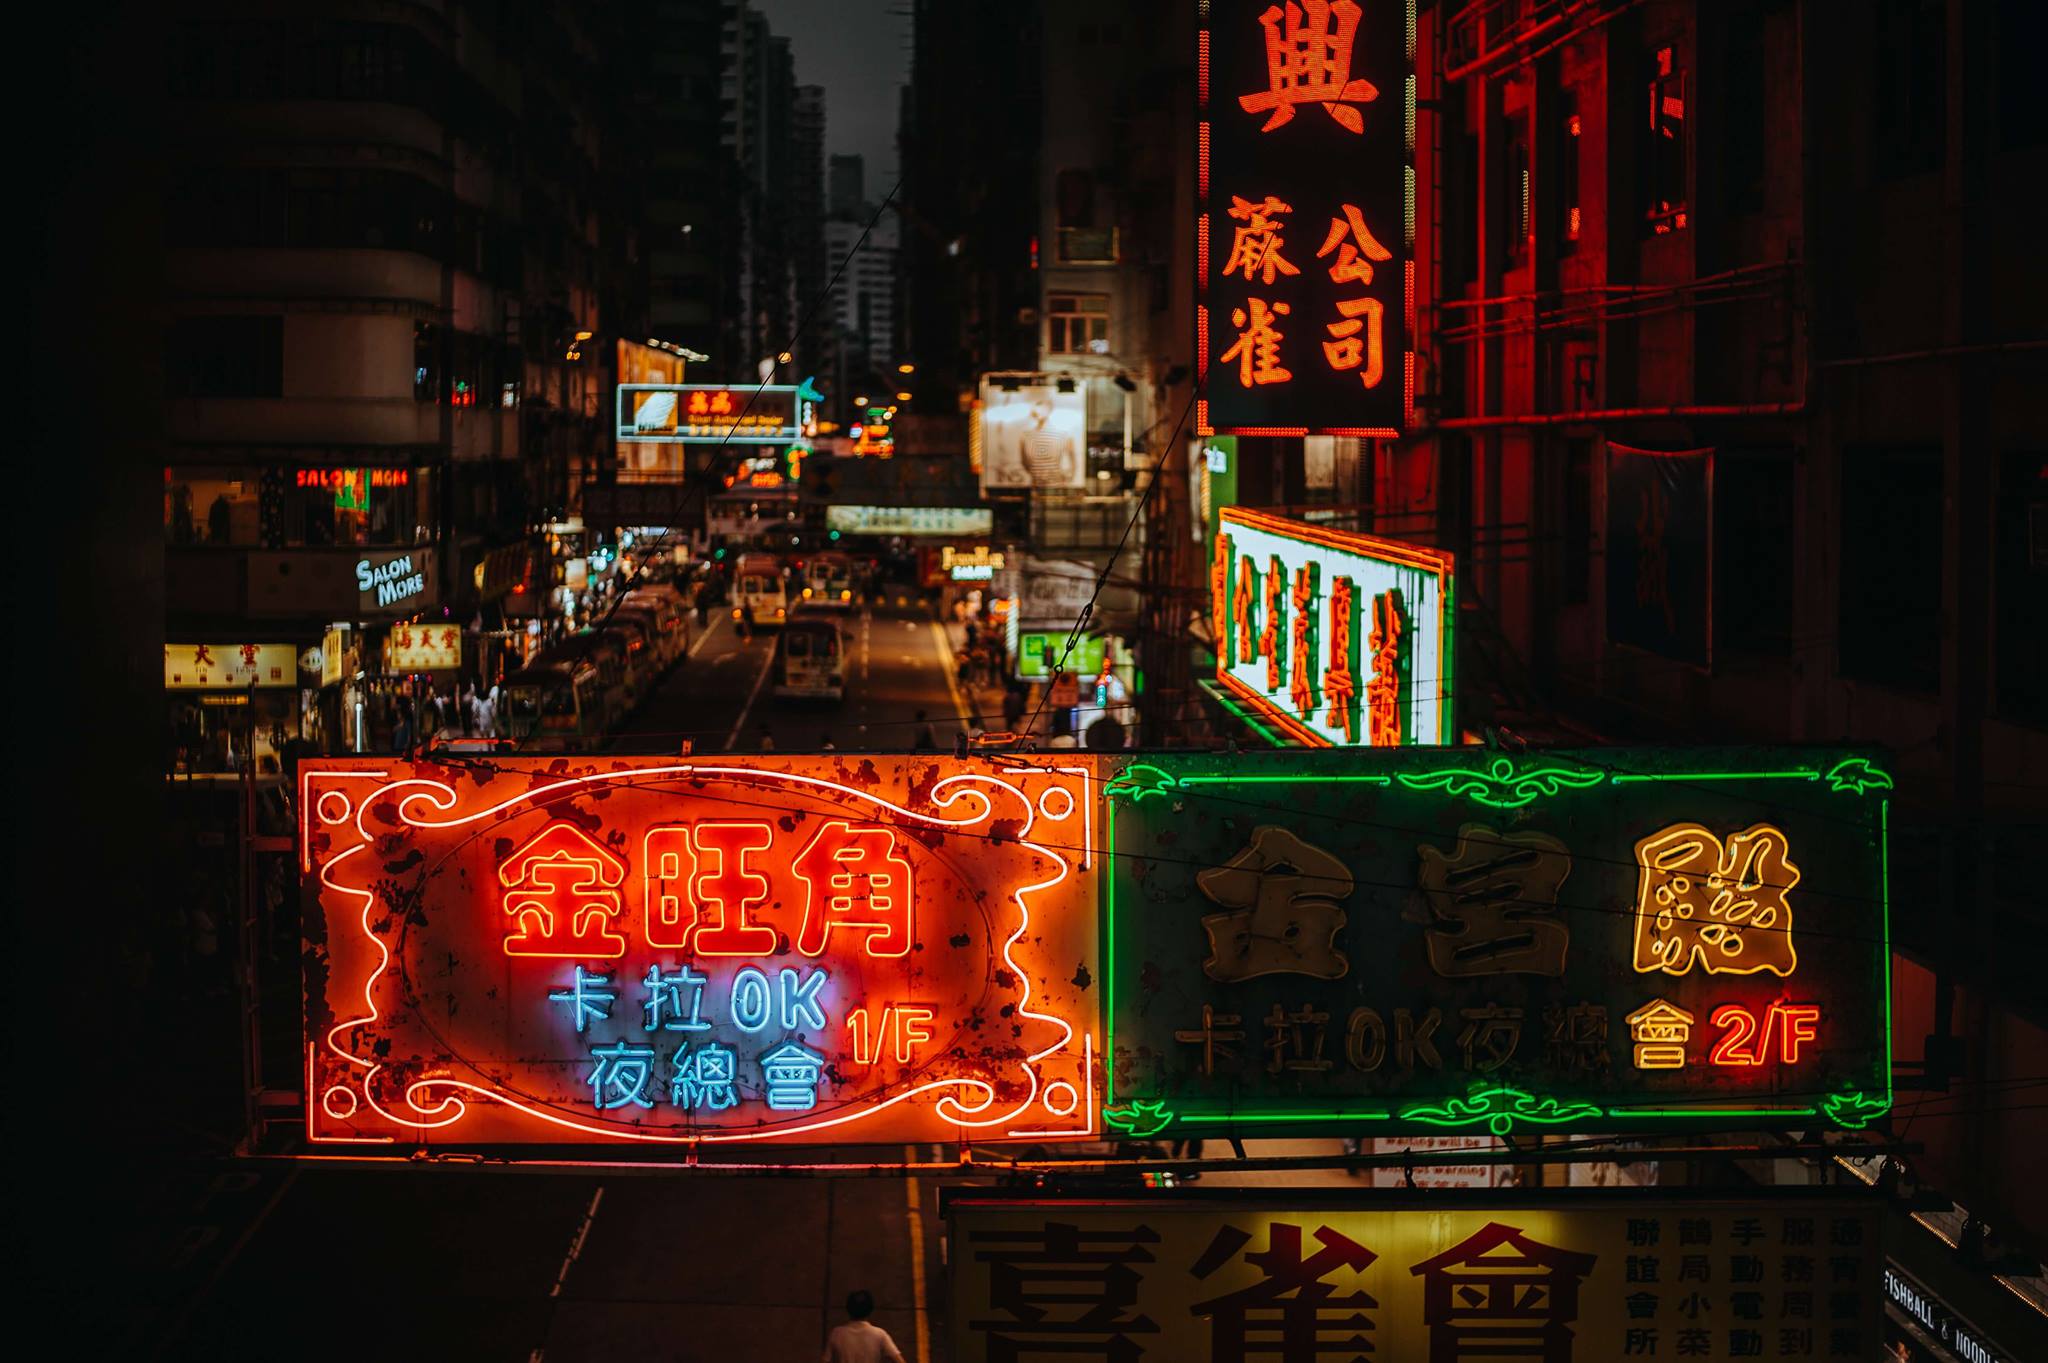 Catch the neon signs before political correctness eliminates them from Hong Kong once and for all [photo credit: Annie Spratt]